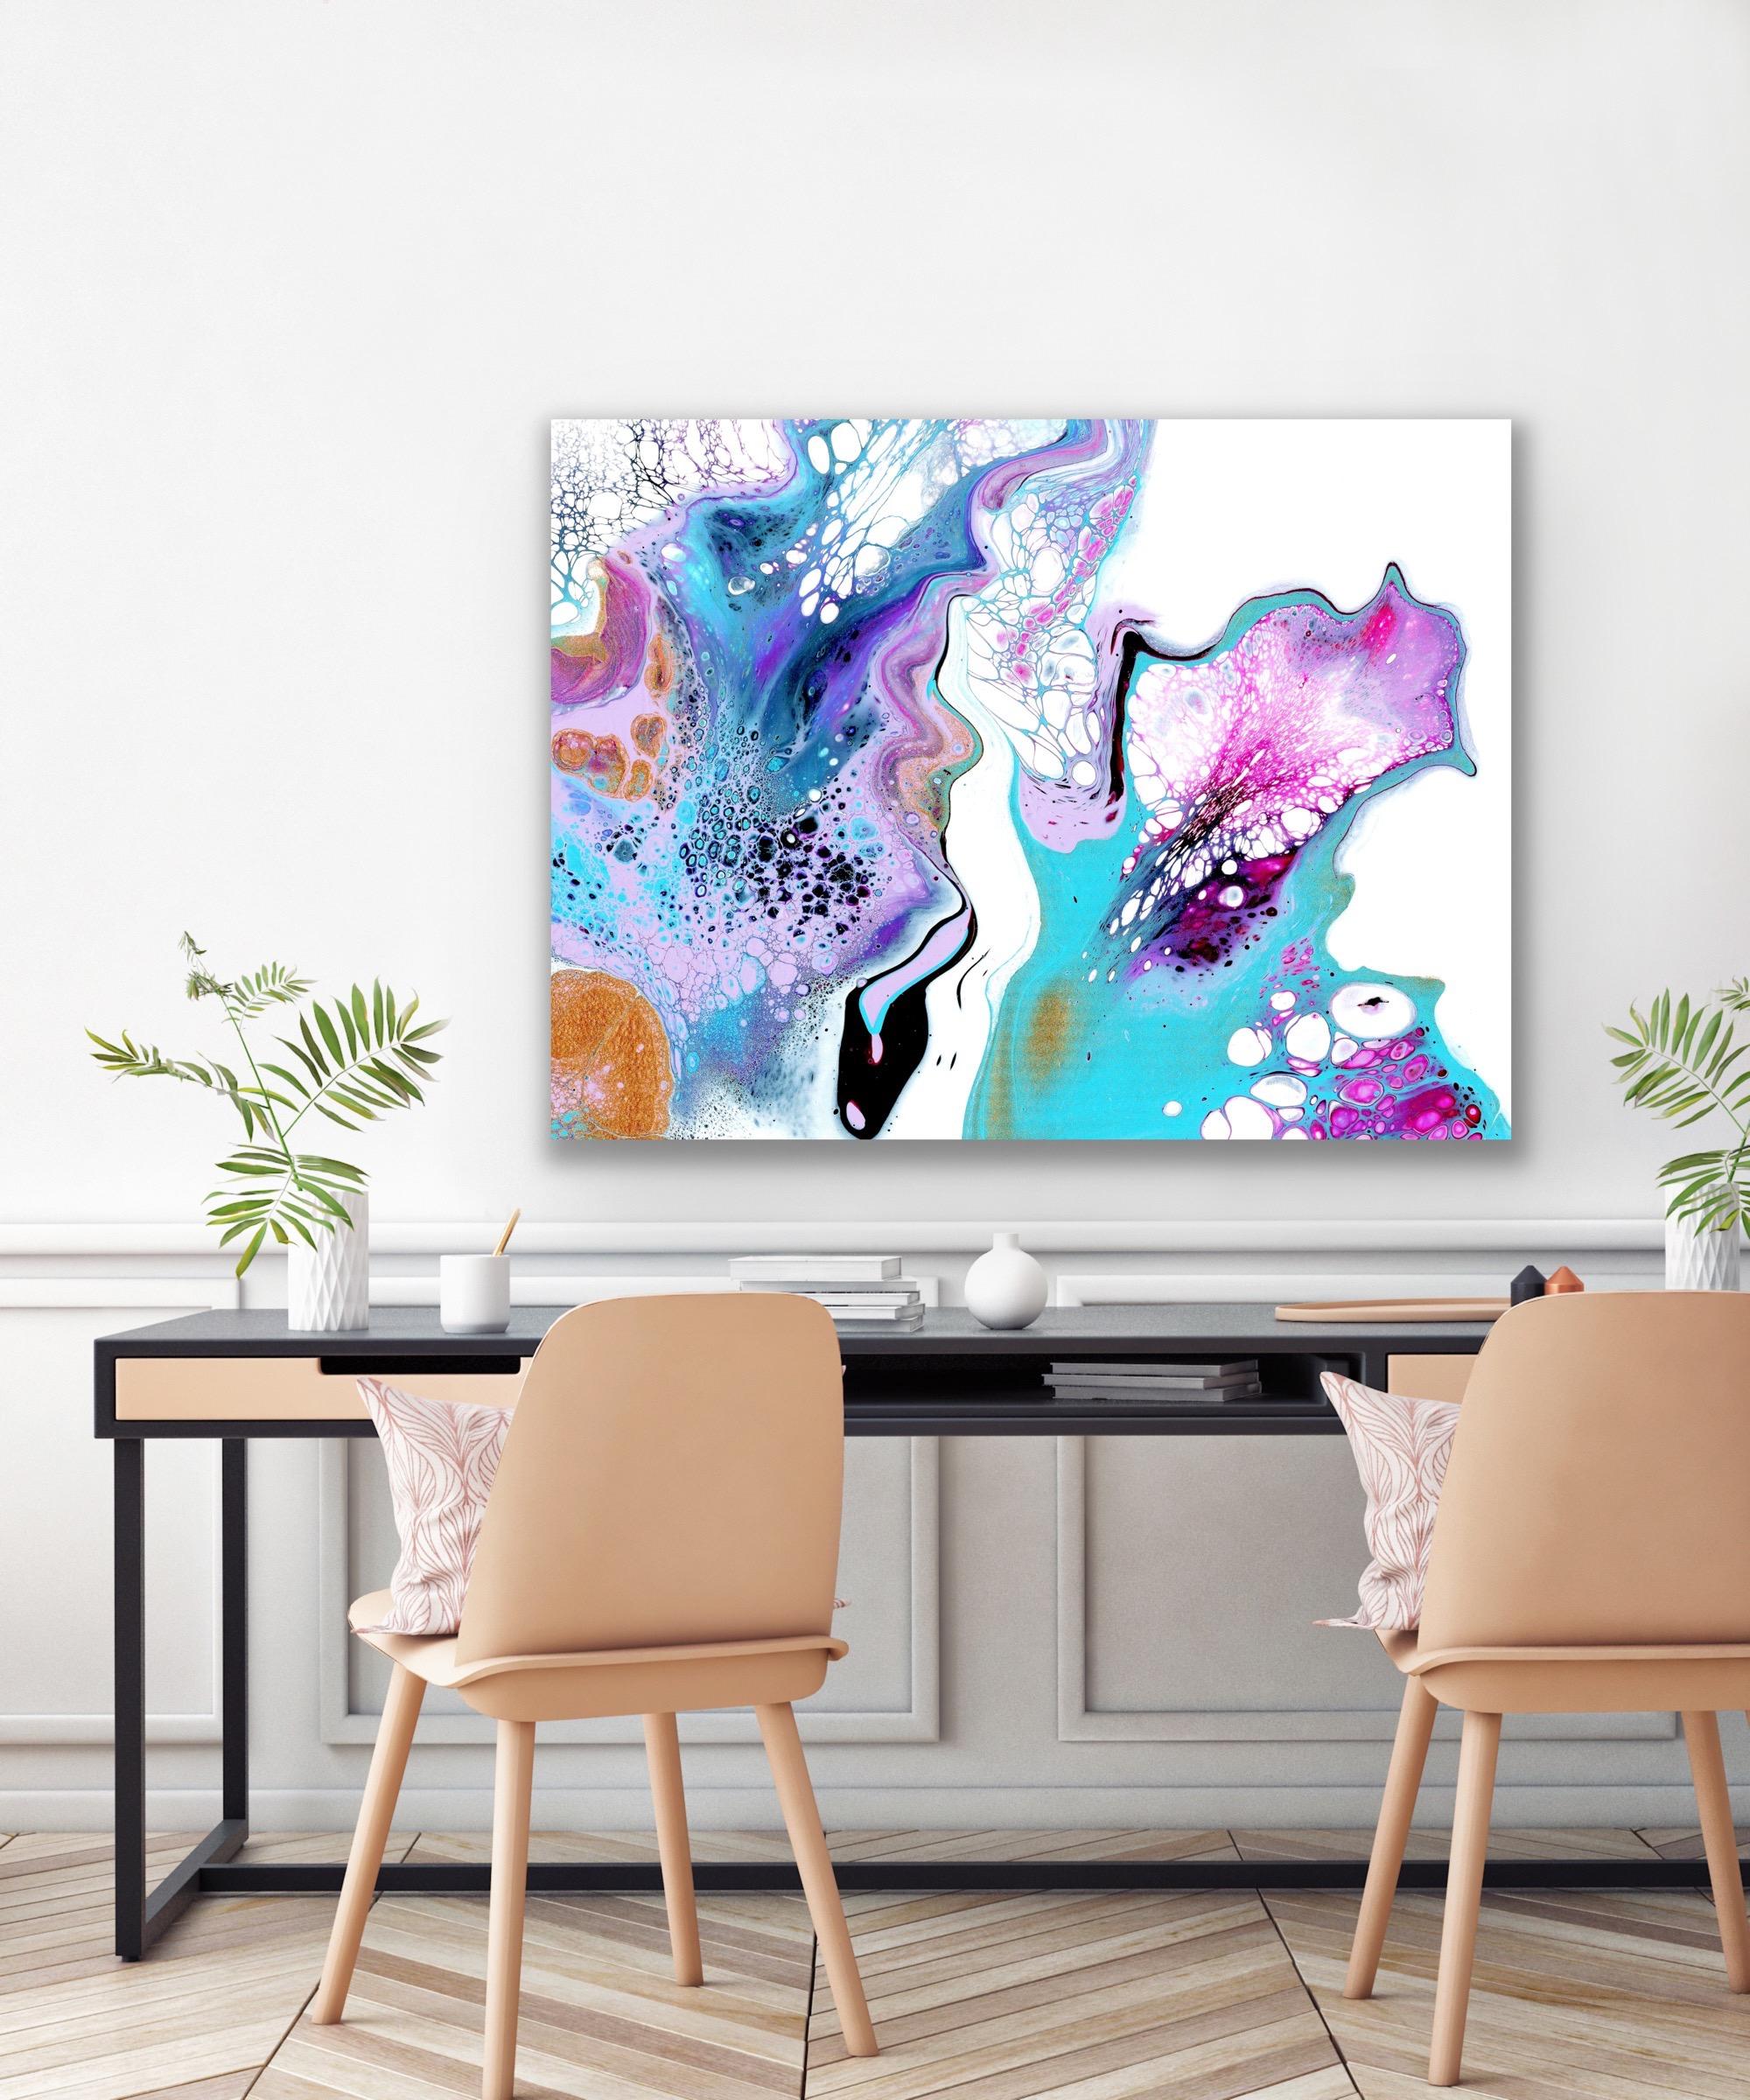 This contemporary colorful abstract painting is printed on a lightweight metal composite and comes signed by the hand-artist and ready to hang. 

-Title: Puissance
-Artist: Celeste Reiter
LIMITED EDITION; 1 of 50
*This piece is a limited edition